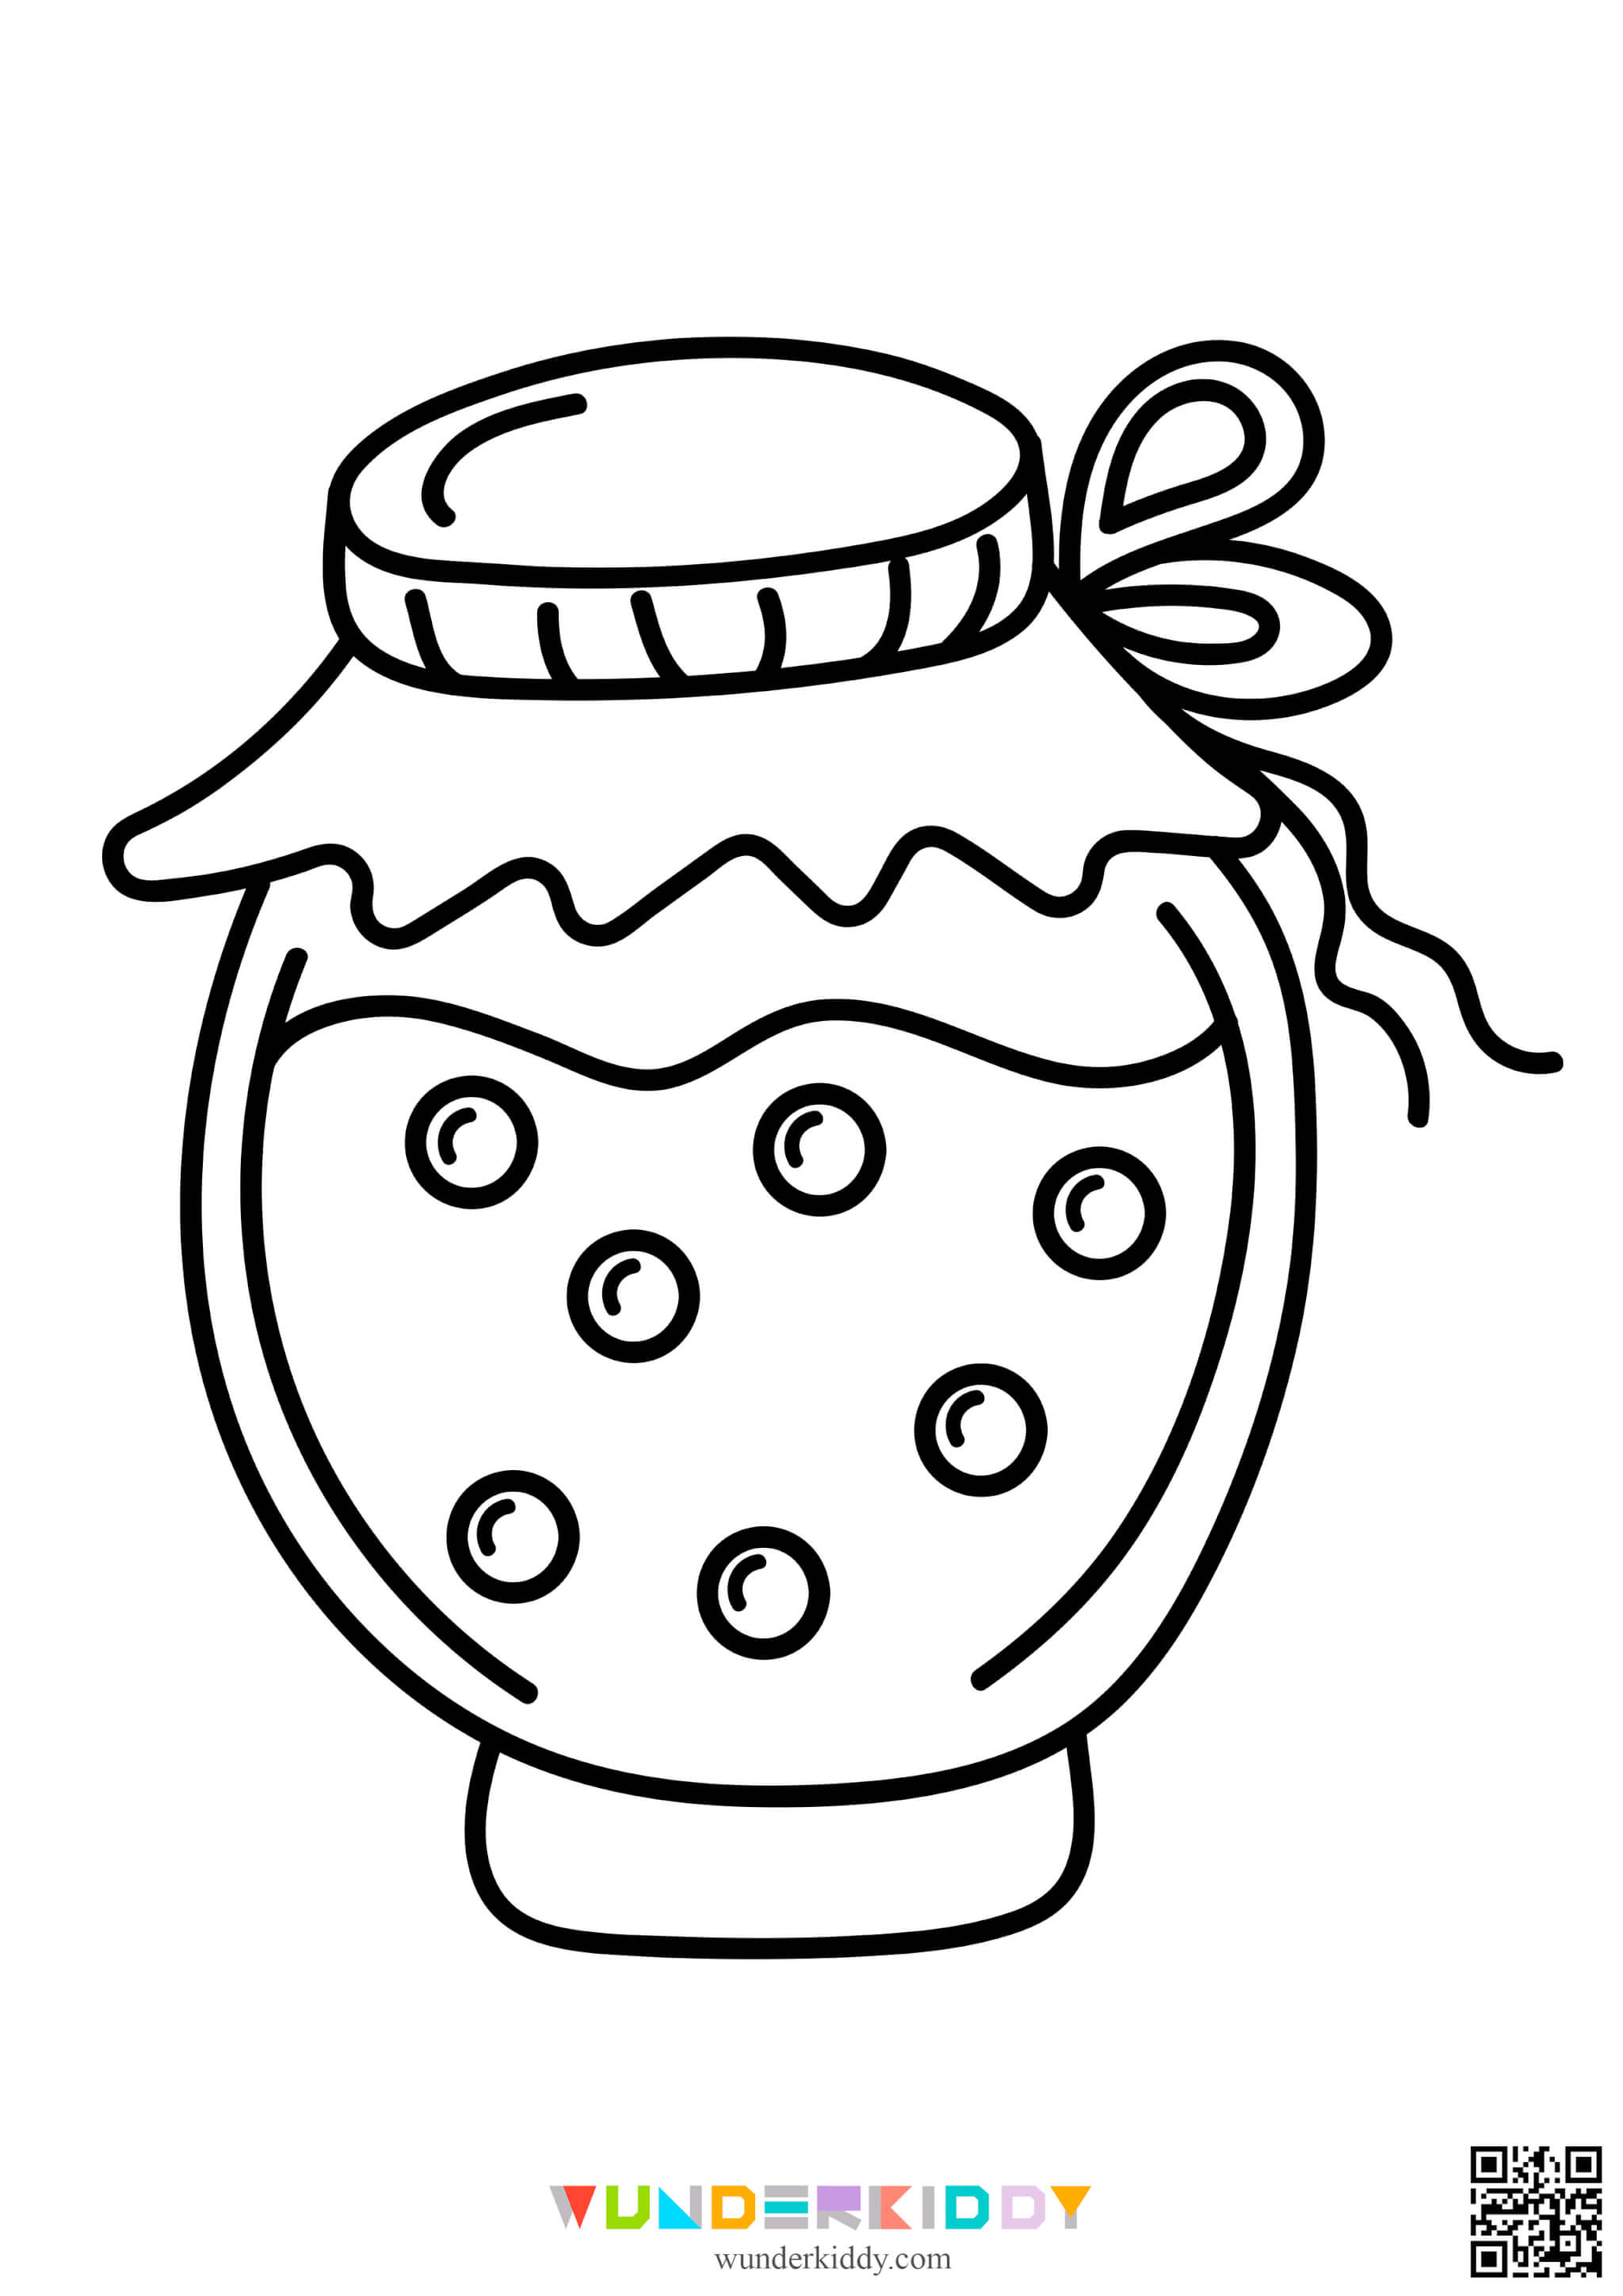 Fall Coloring Pages - Image 19